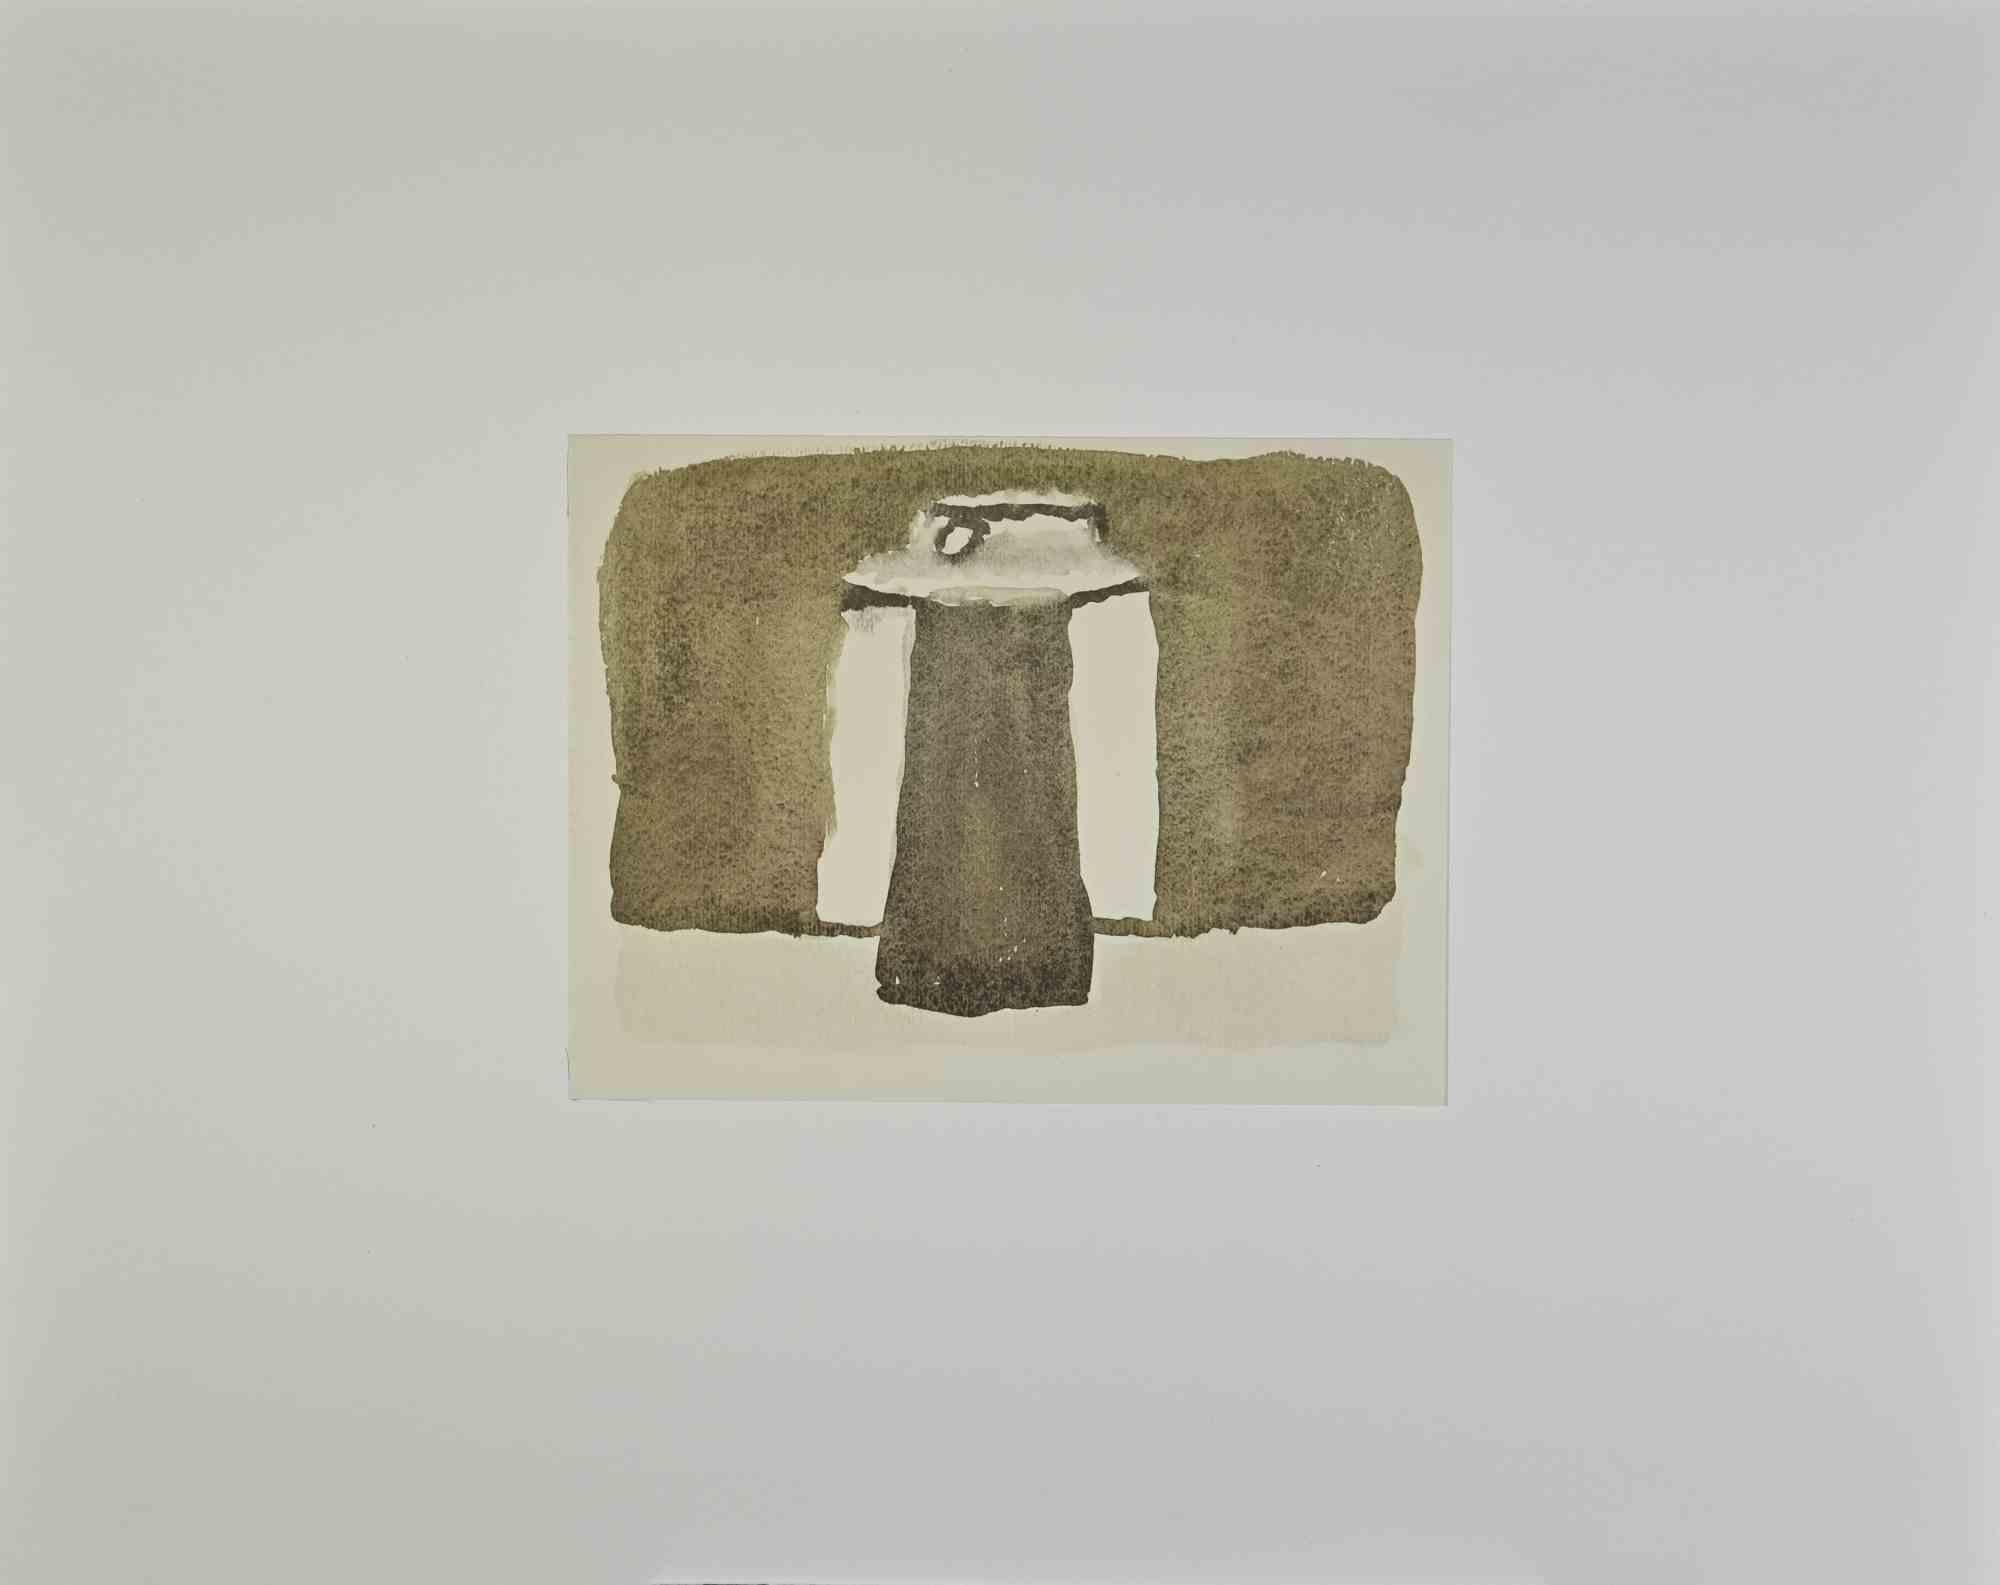 Still Life is an offset print, reproducing the original watercolor by Giorgio Morandi.

Signature and date by the artist is perfectly reproduced on plate. Image Dimensions: 16 x 21 cm

From the volume "L'Opera grafica di Giorgio Morandi", text by